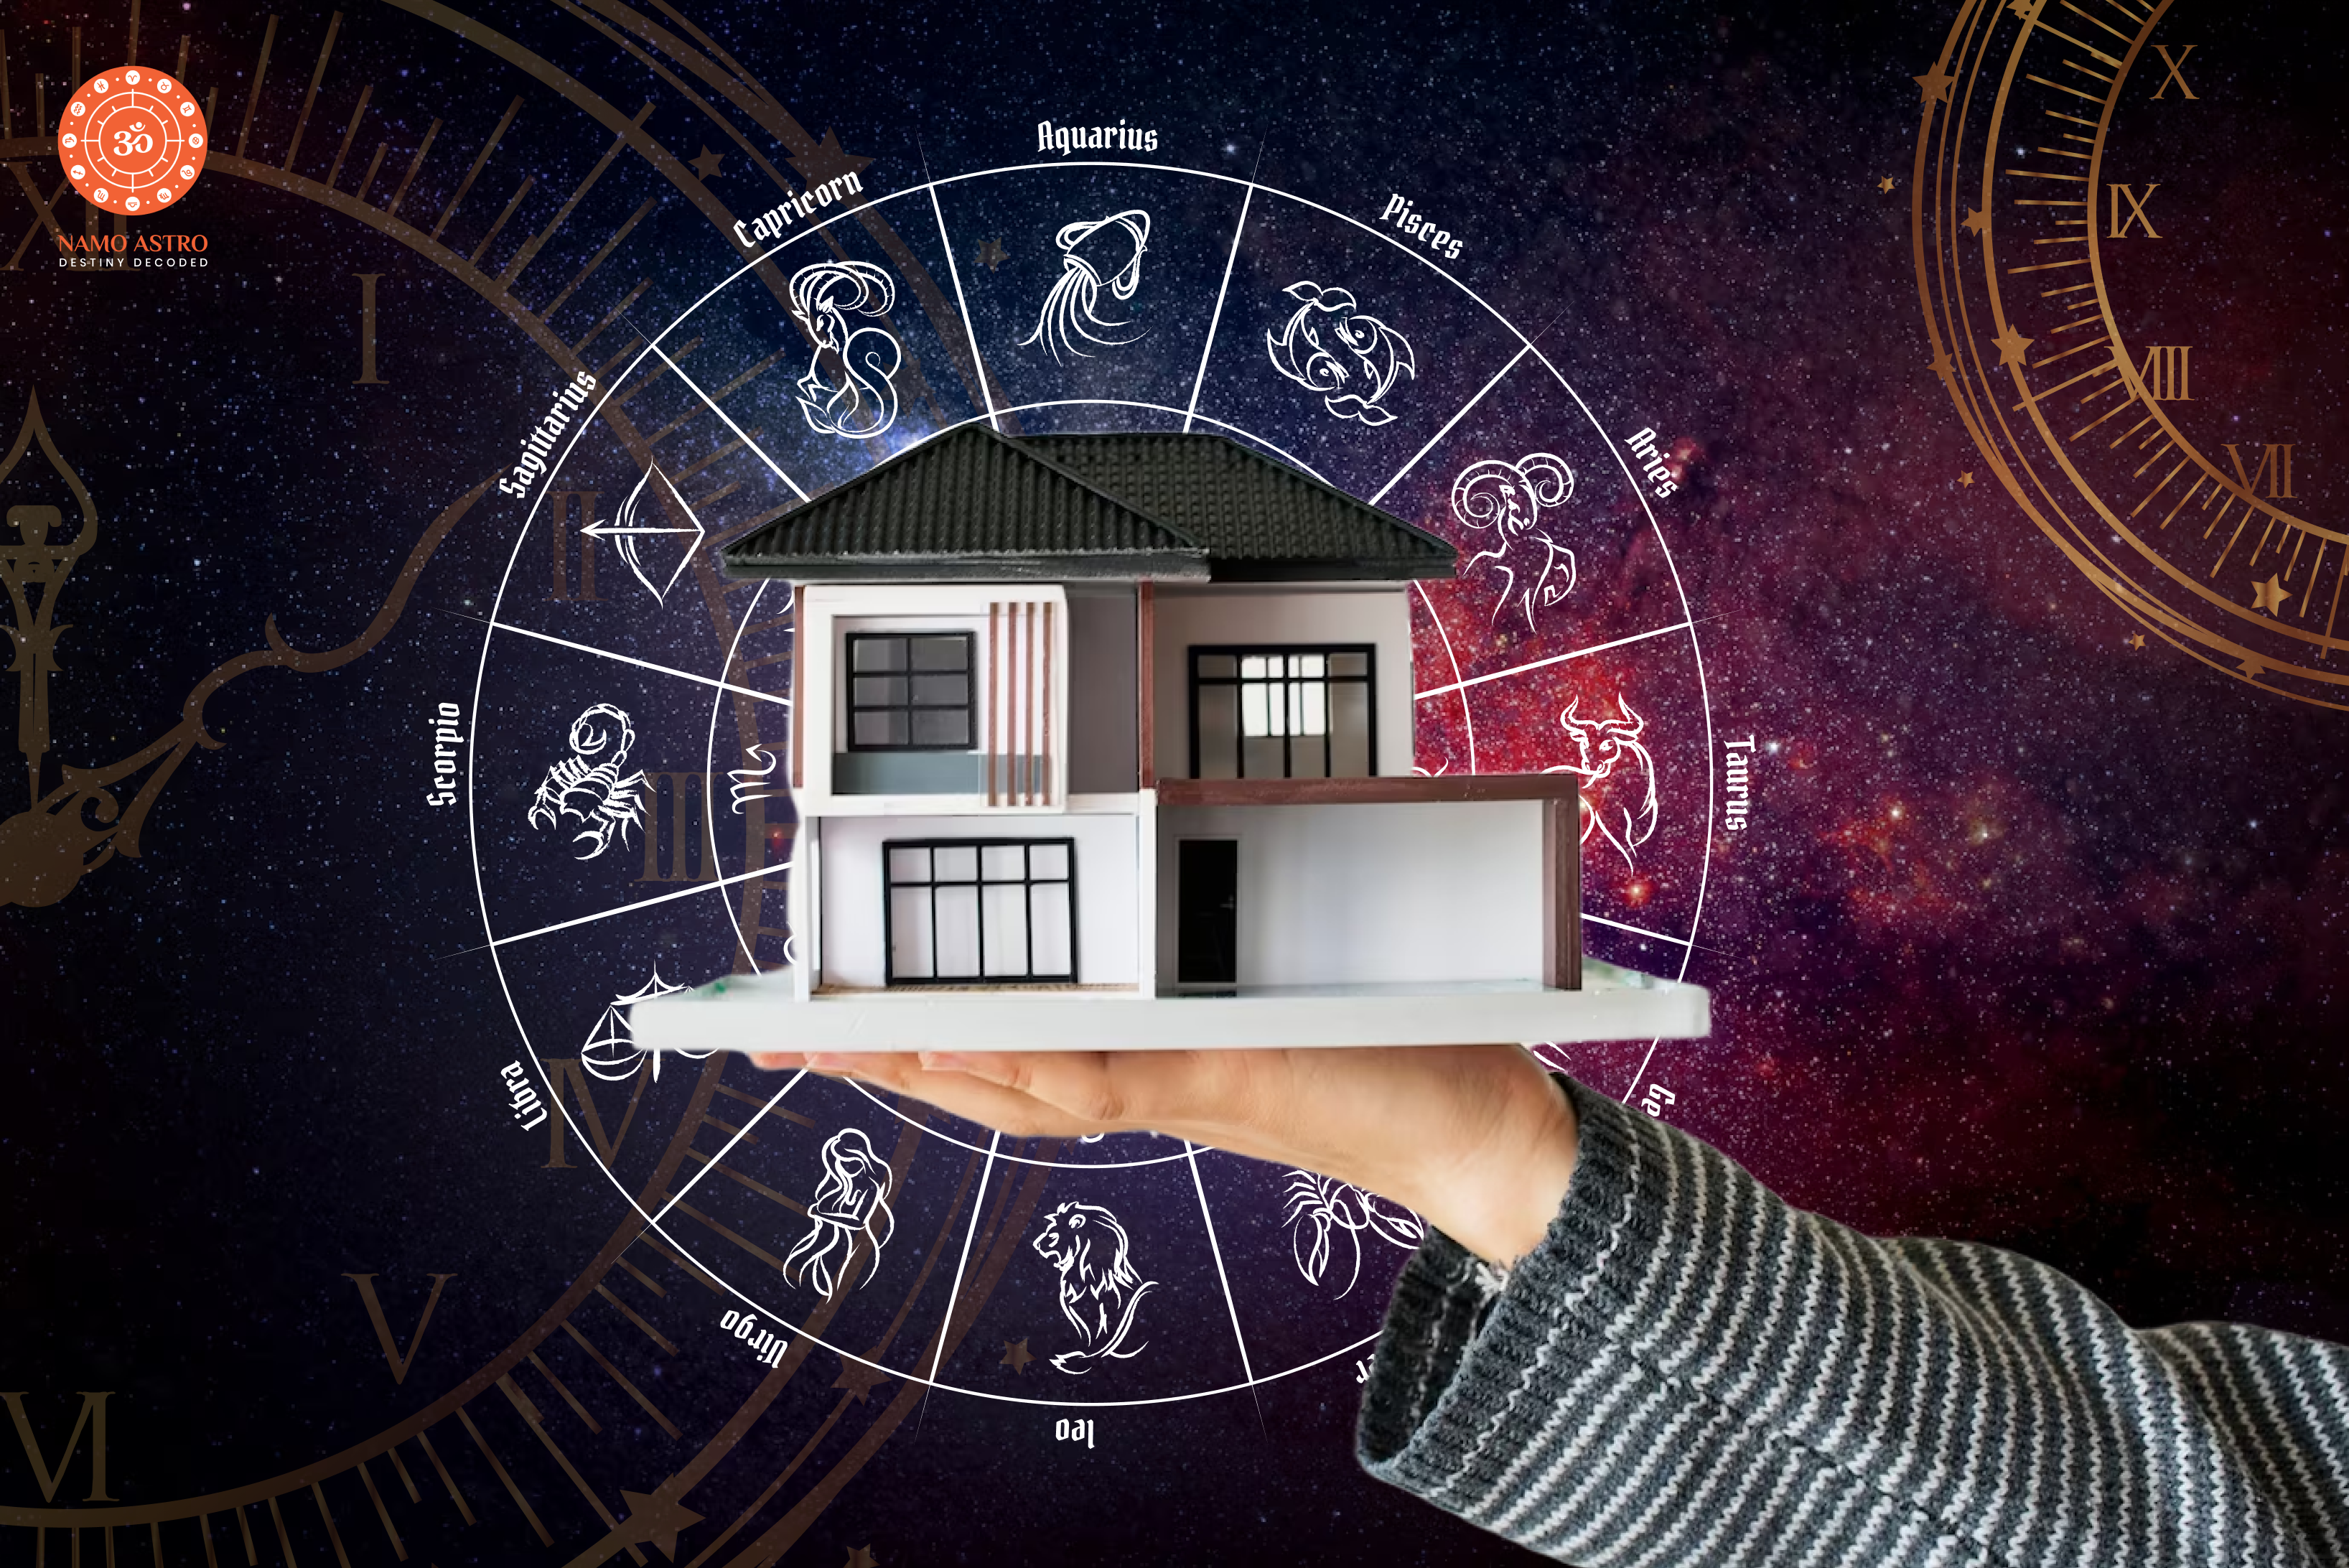 Find Out the Best Time to Build a House According to Astrology